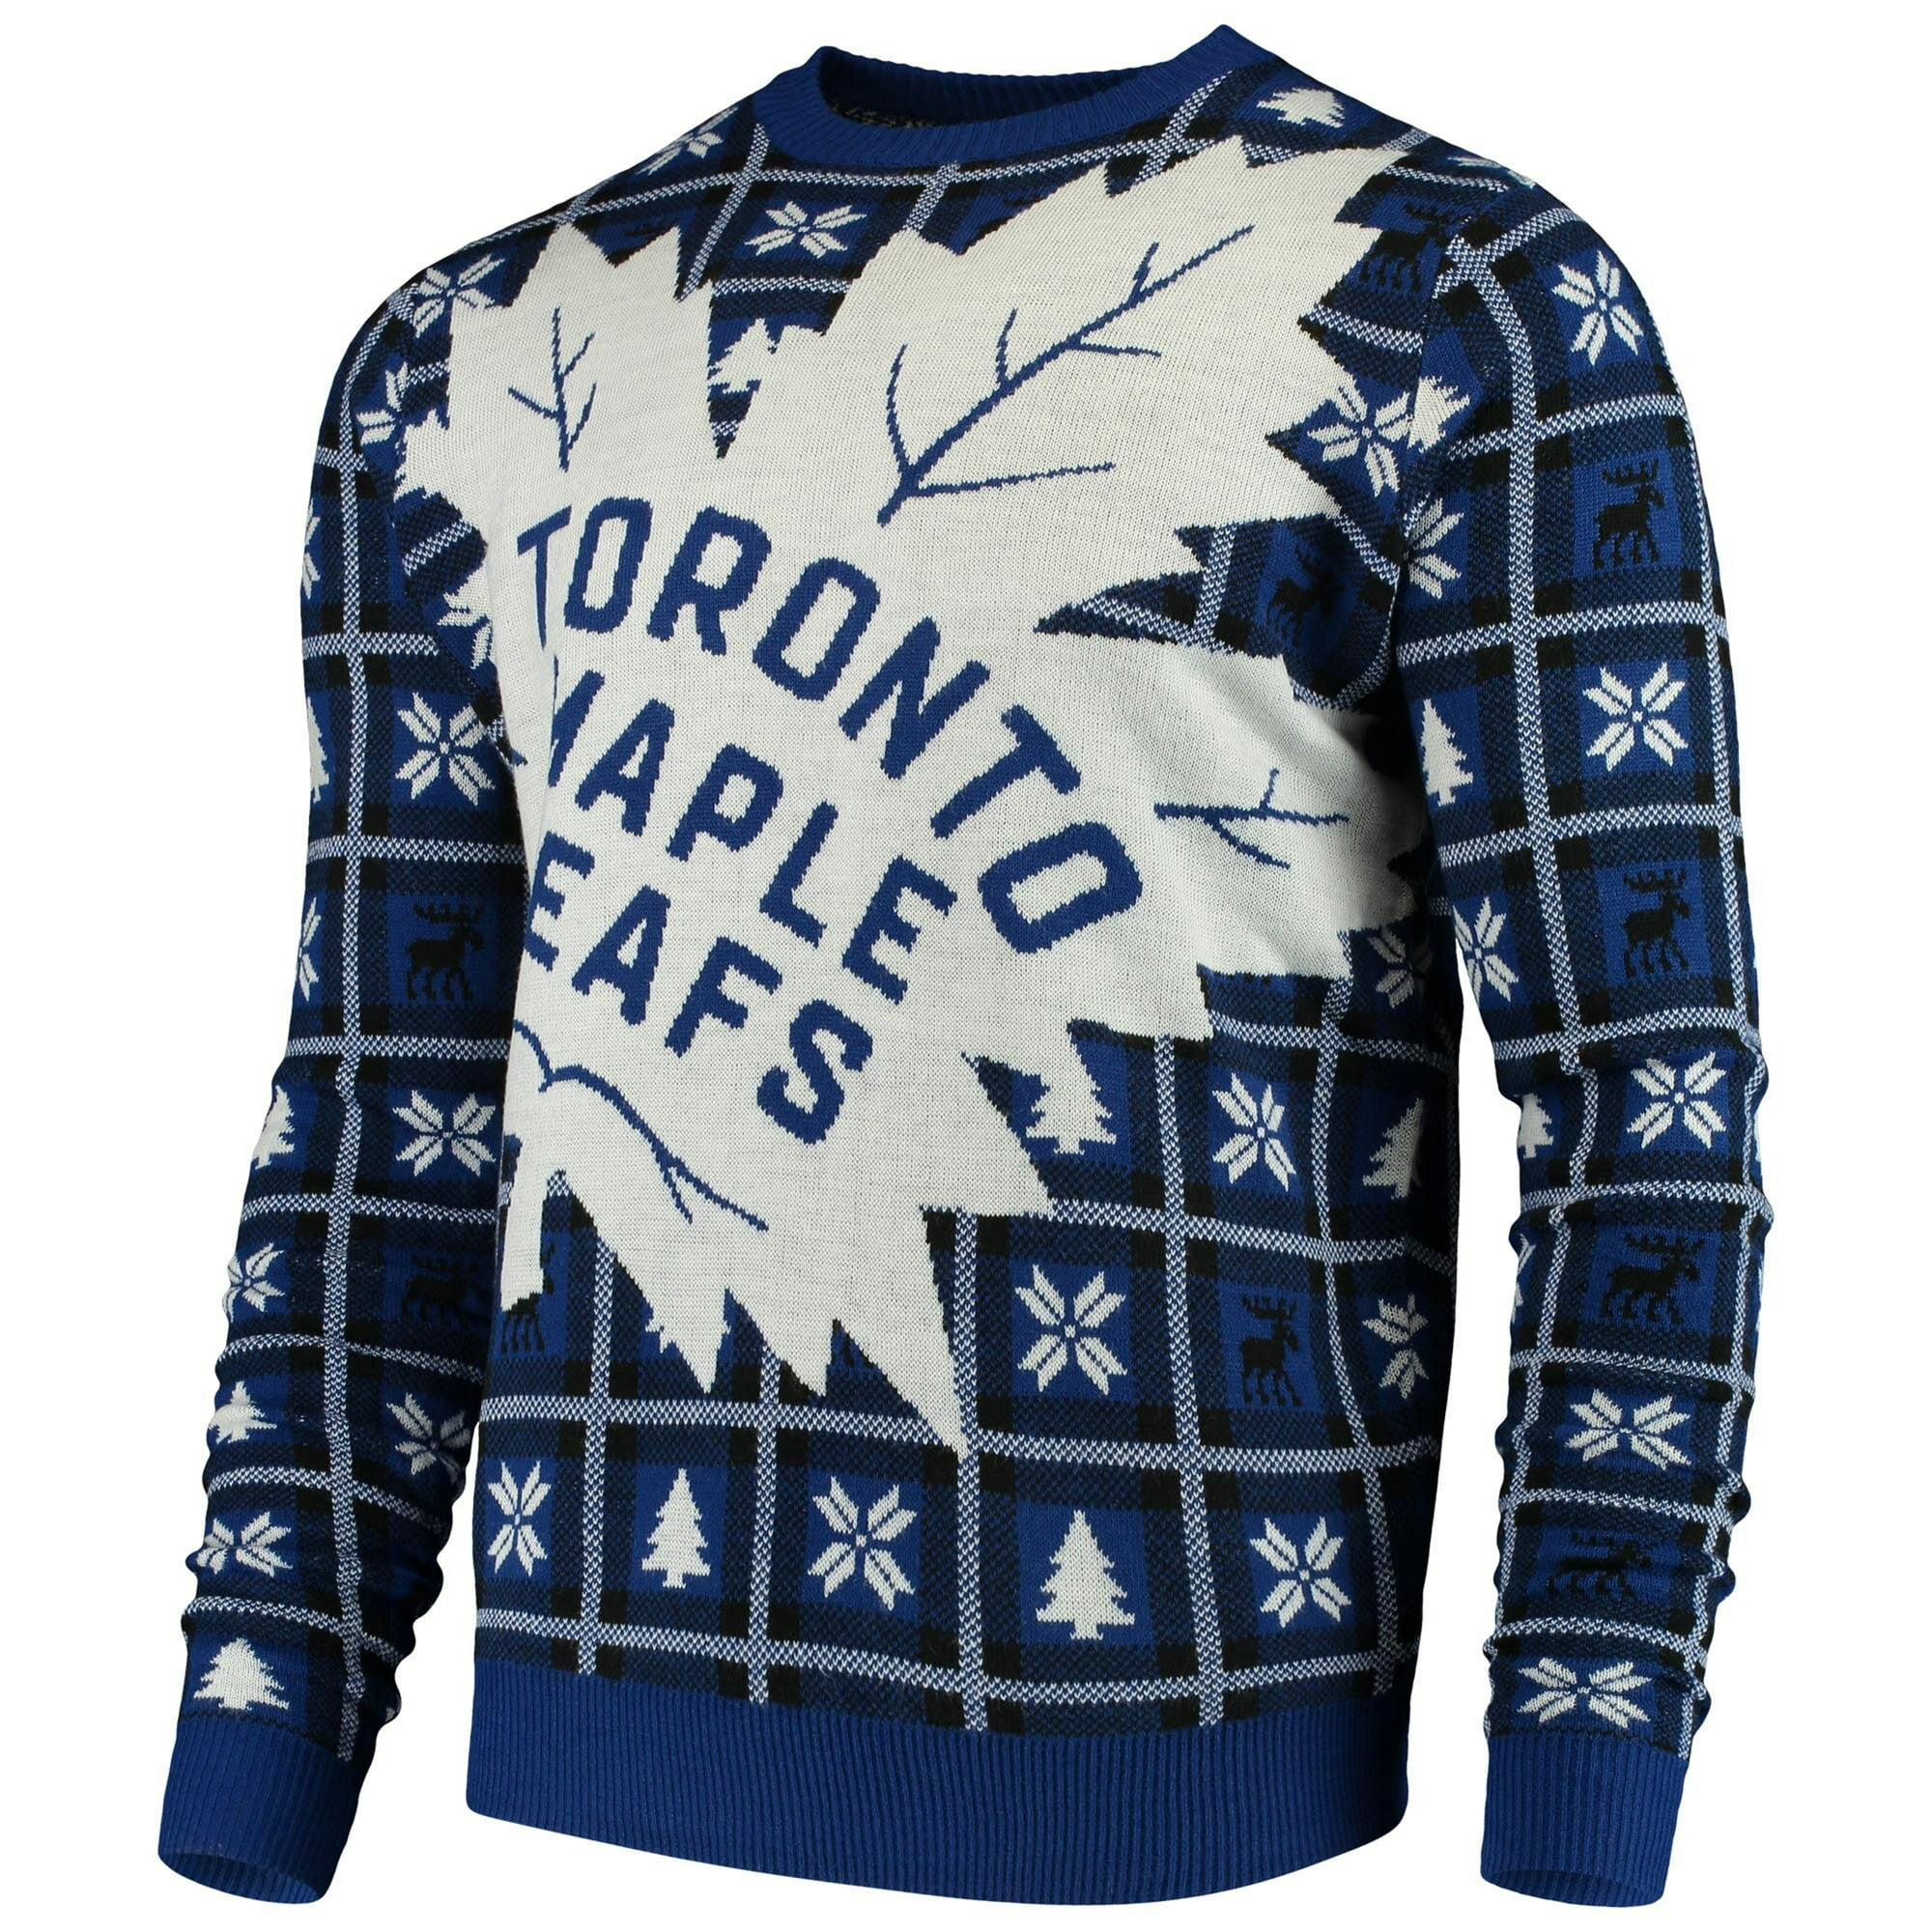 Toronto Maple Leafs Christmas Pattern Knitted Ugly Sweater AOP For